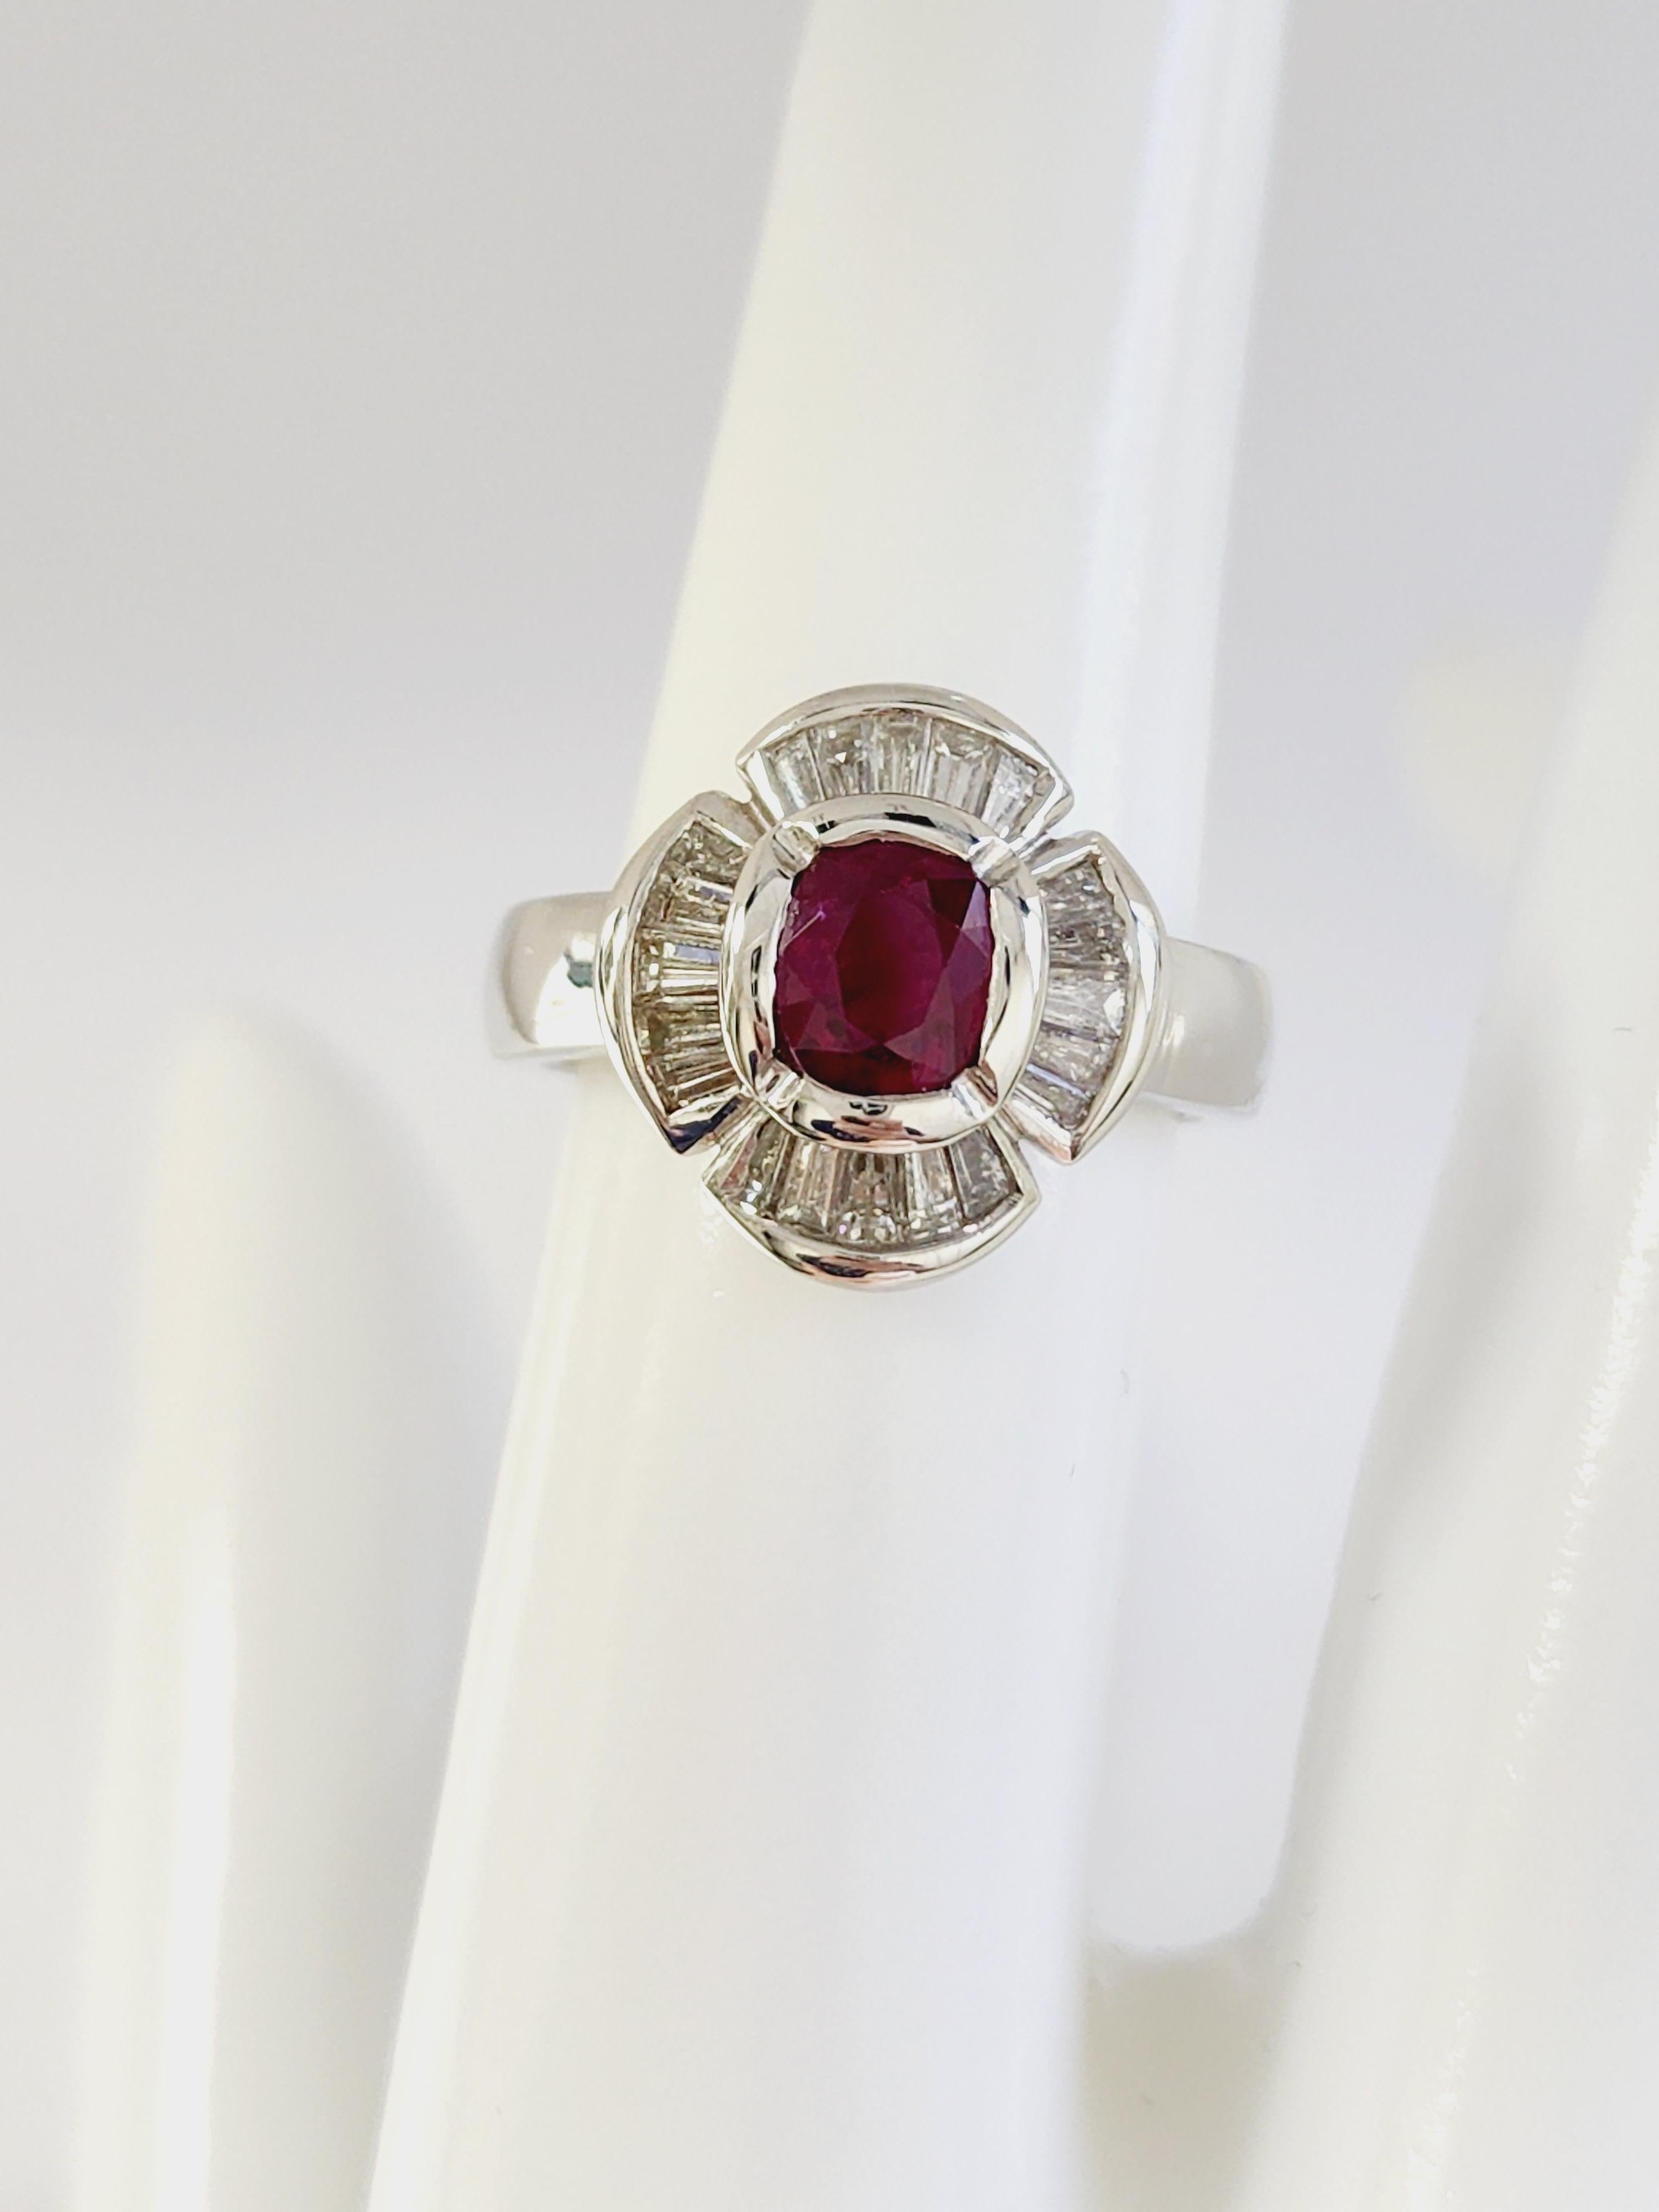 Elegant Ruby Cushion Shape Baguette Diamond Ring 18 Karat White Gold In New Condition For Sale In Great Neck, NY